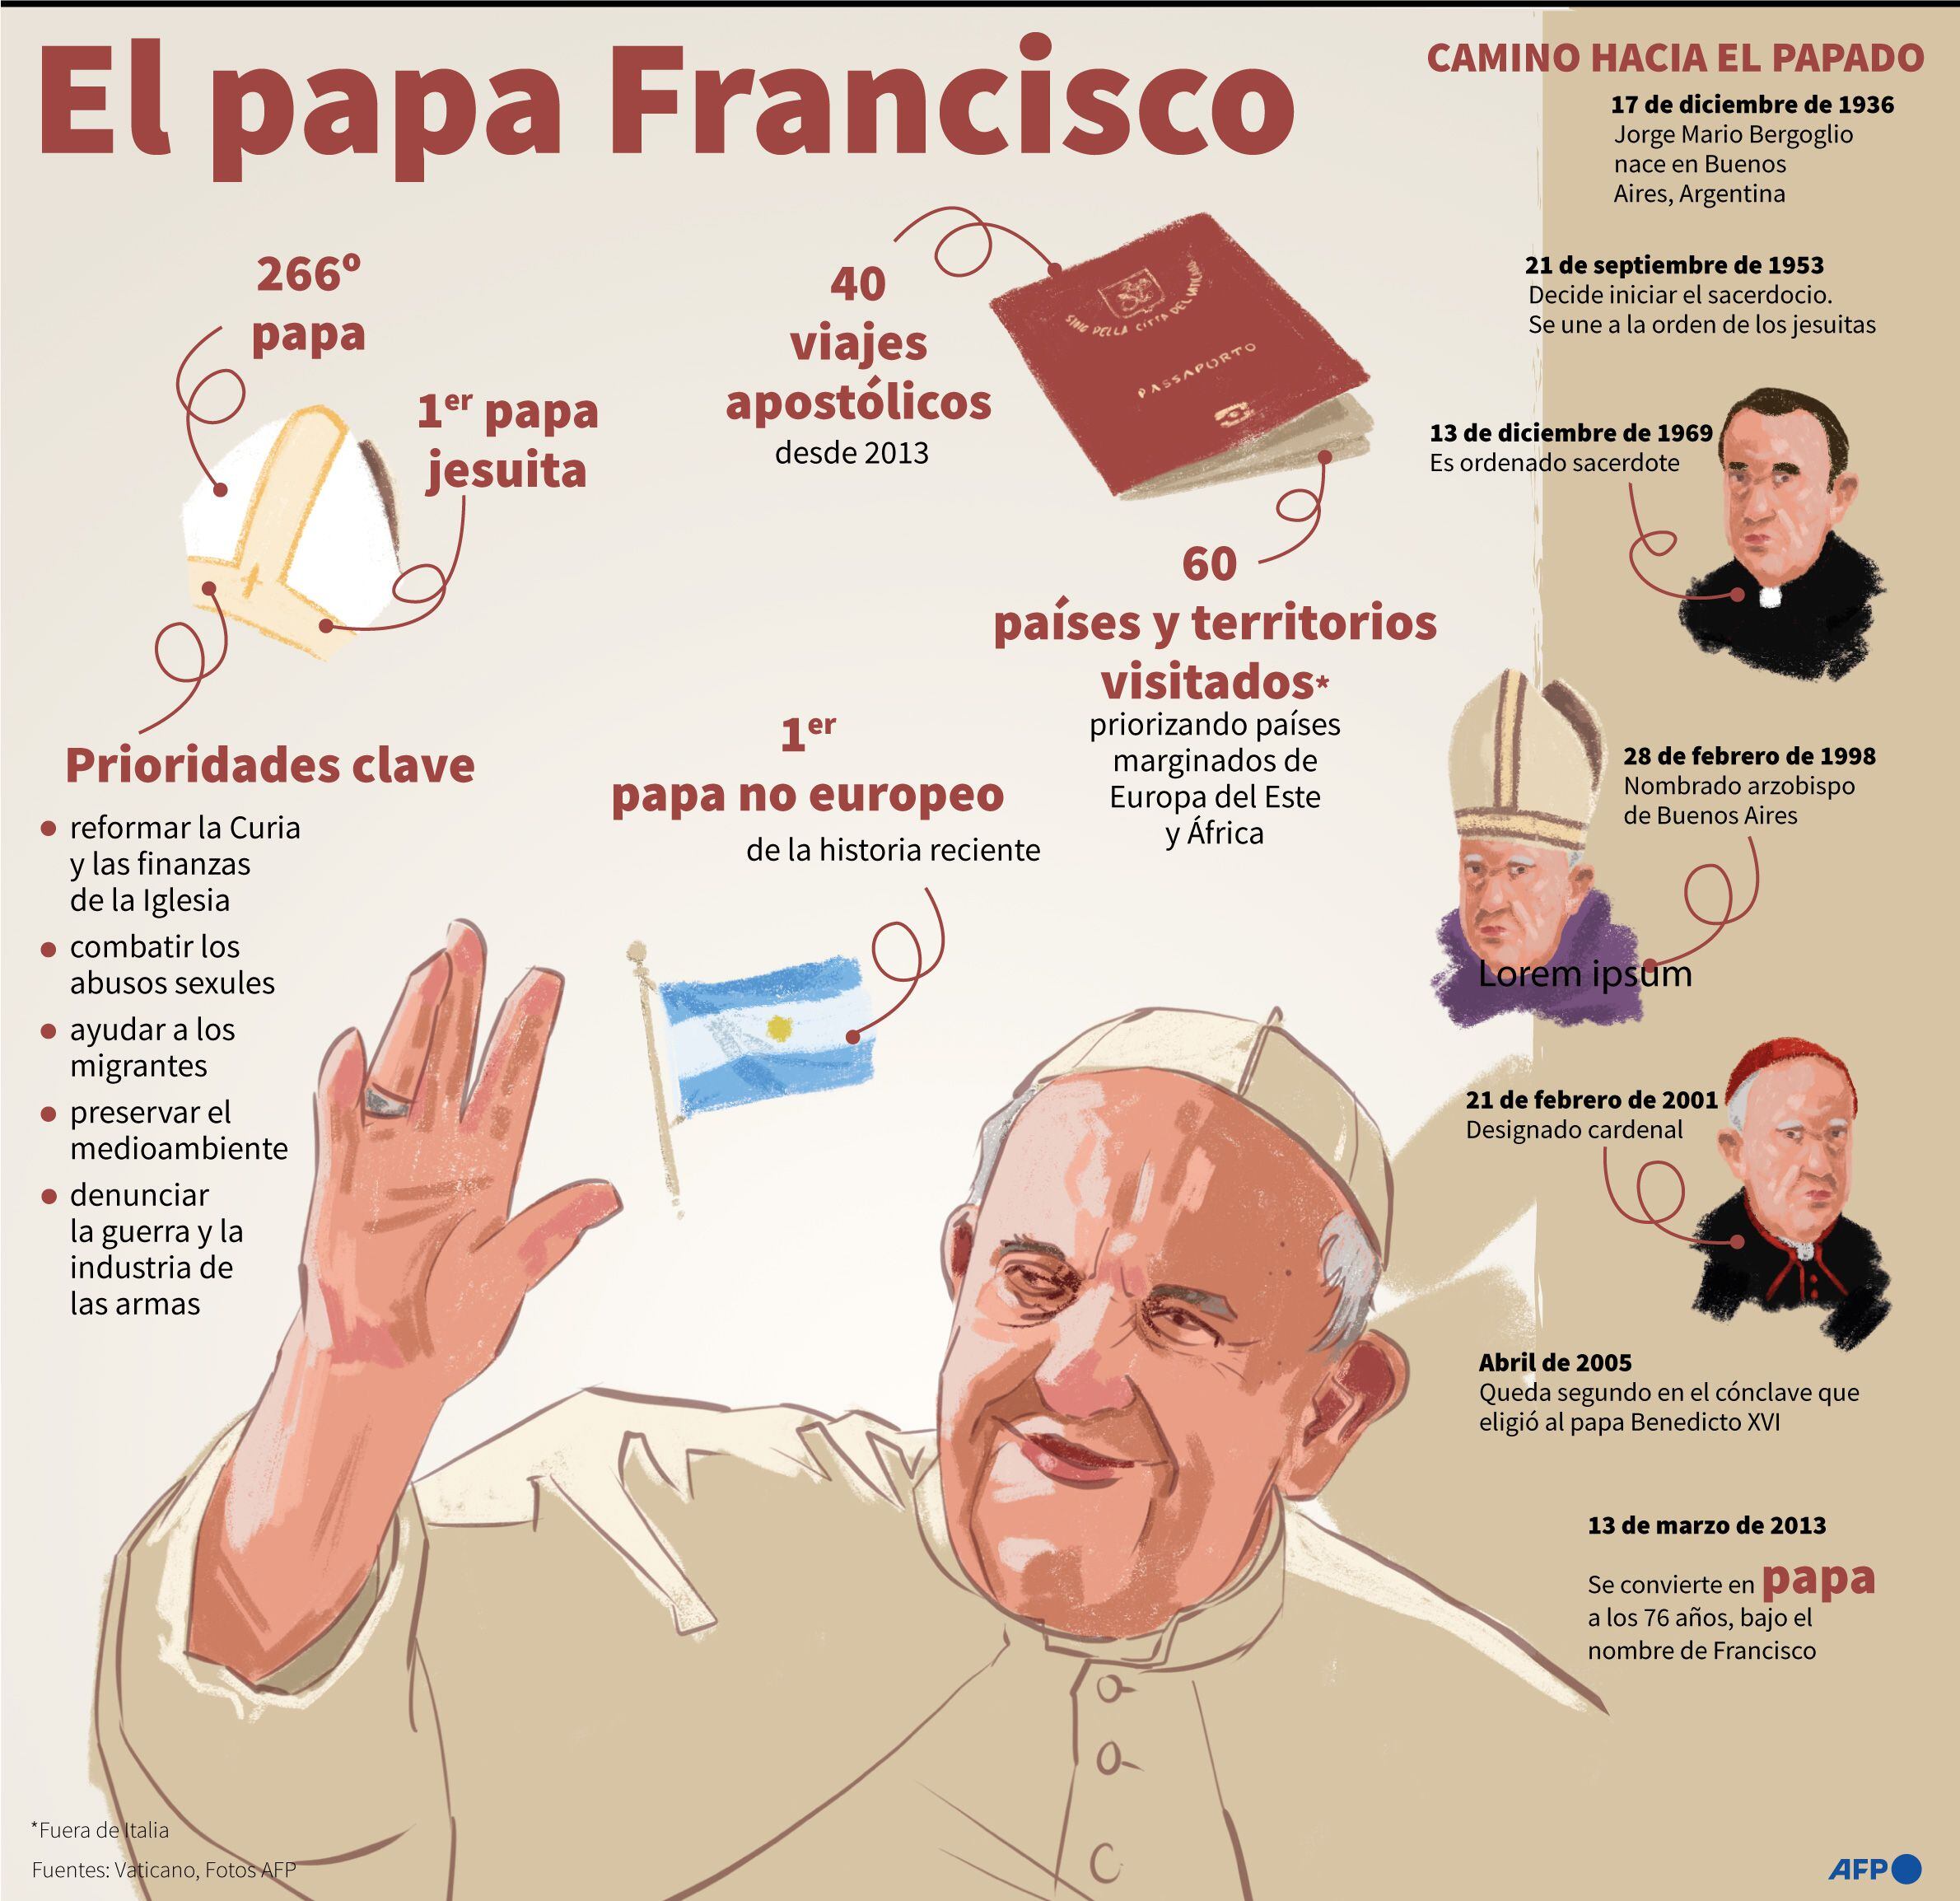 Facts about Pope Francis.  Source: AFP